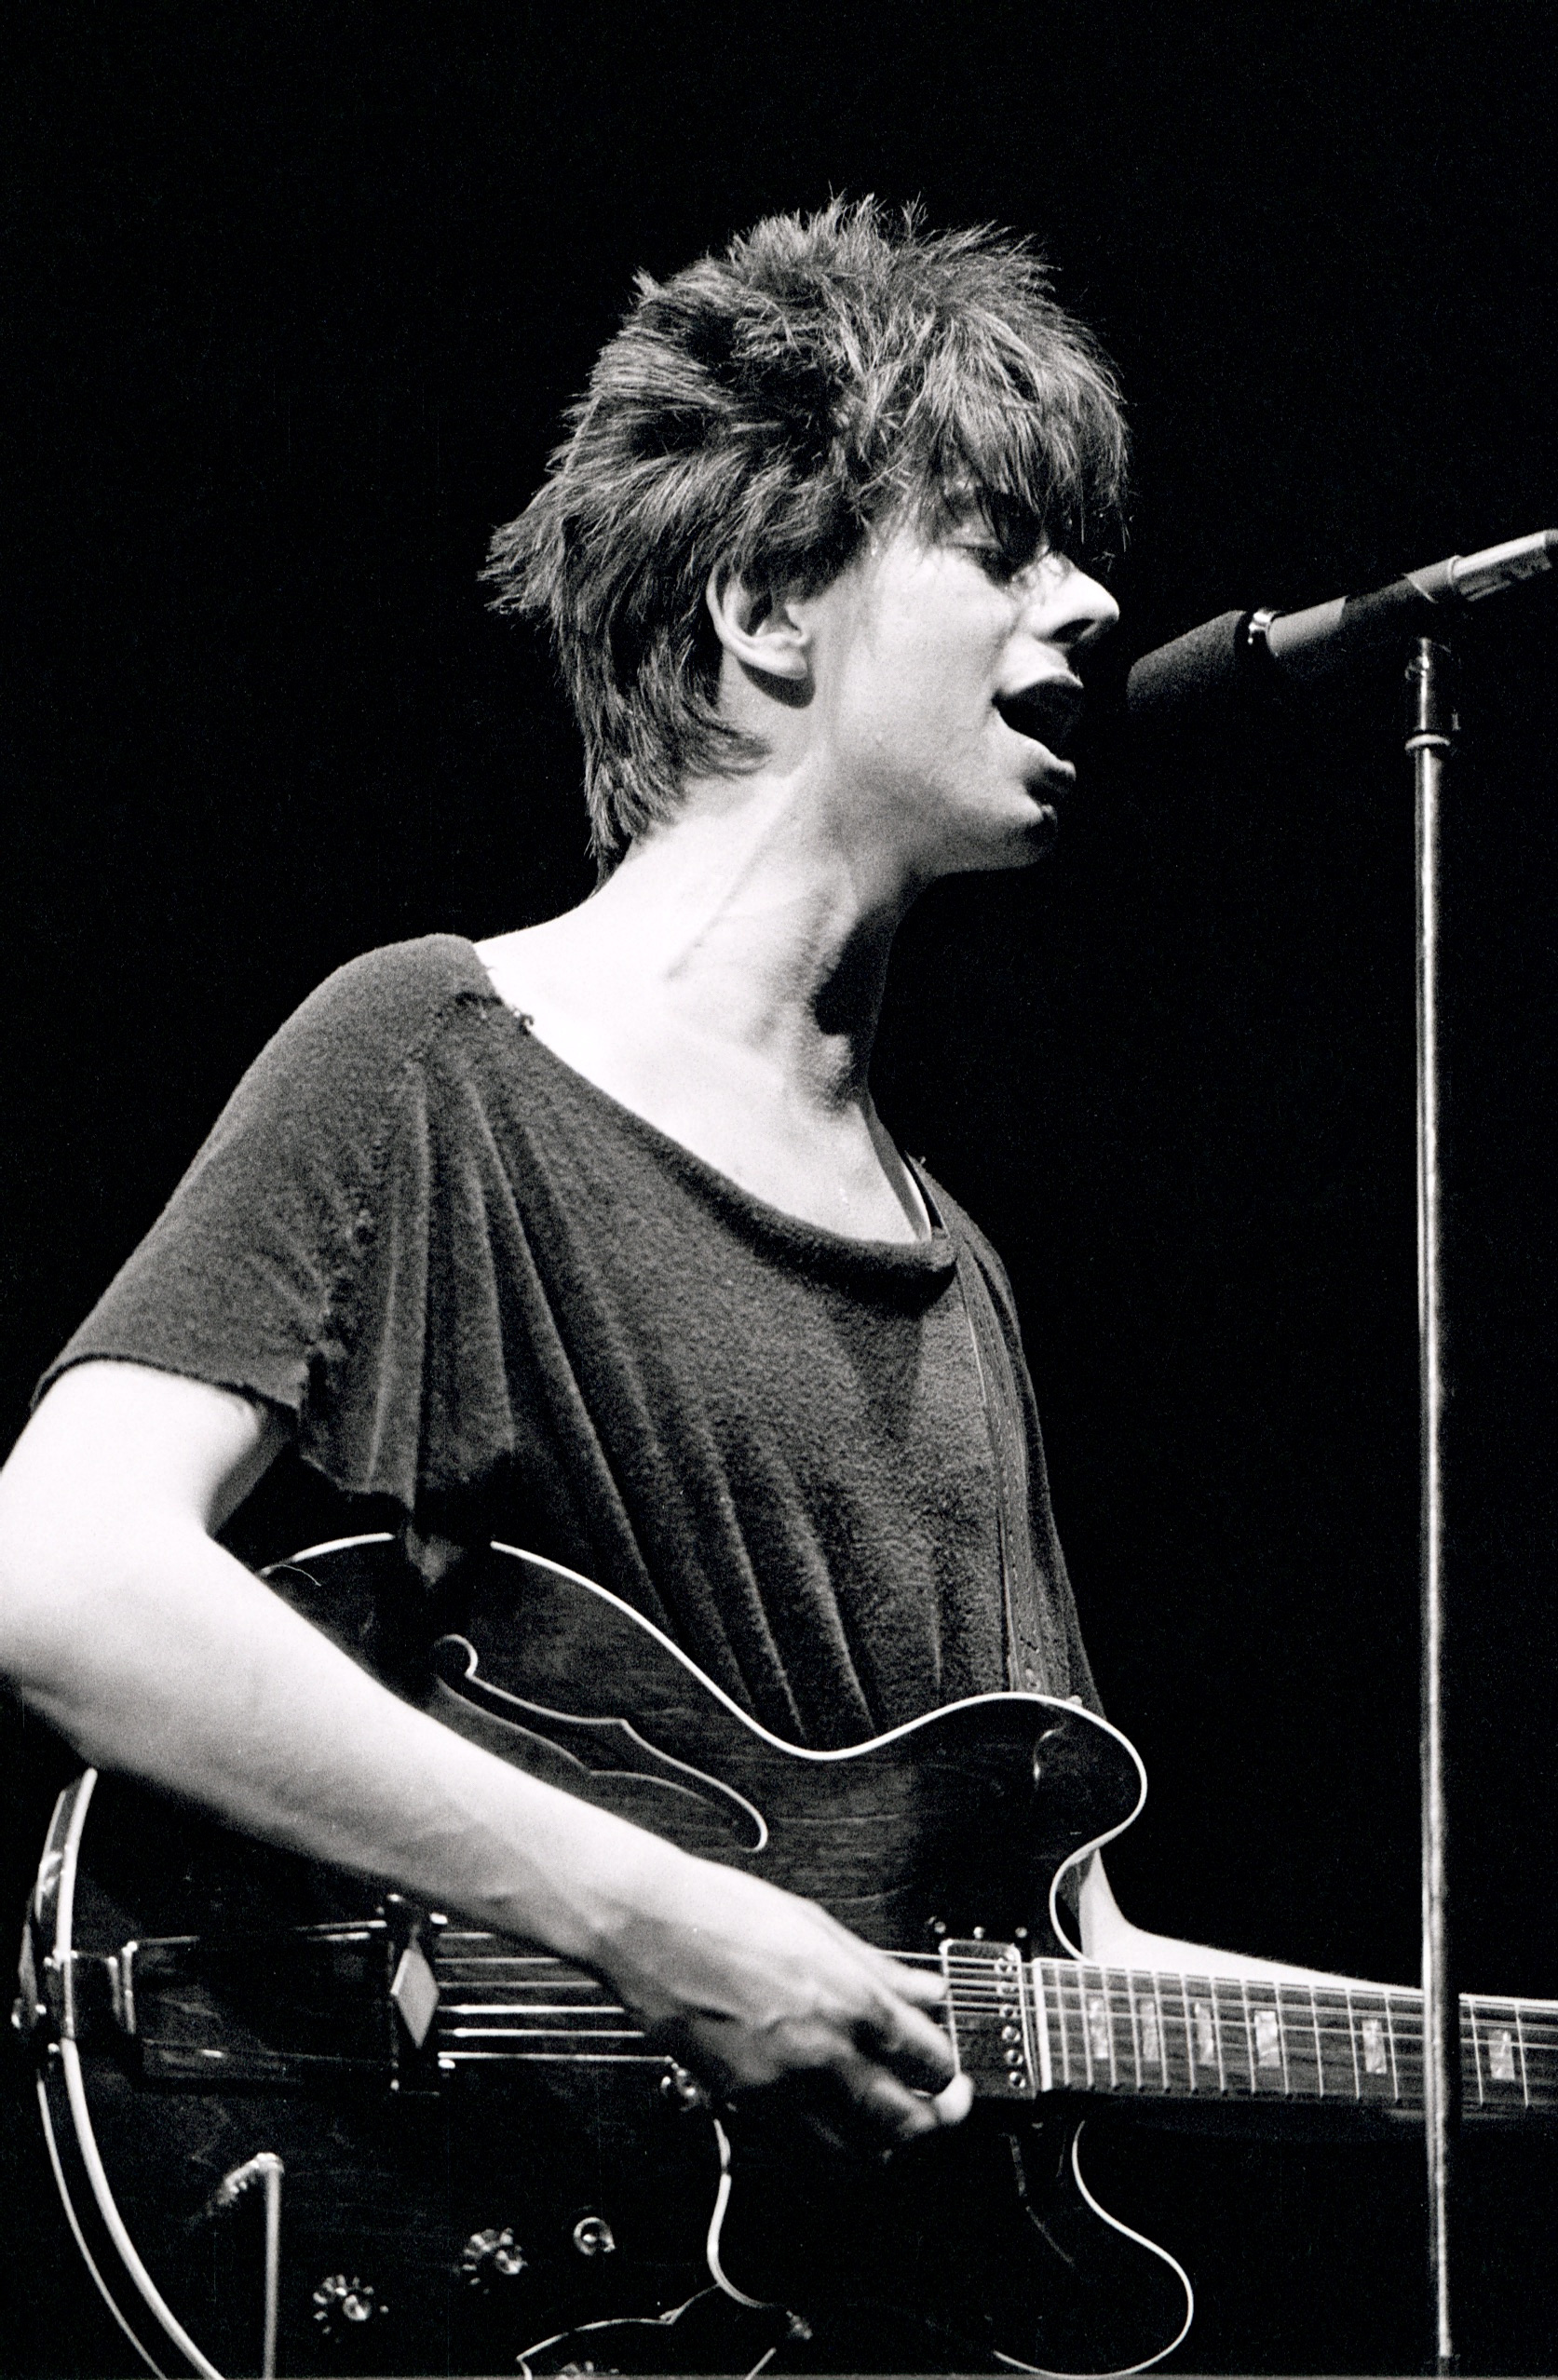 Echo and the Bunnymen's Ian McCulloch at WOMAD 1982